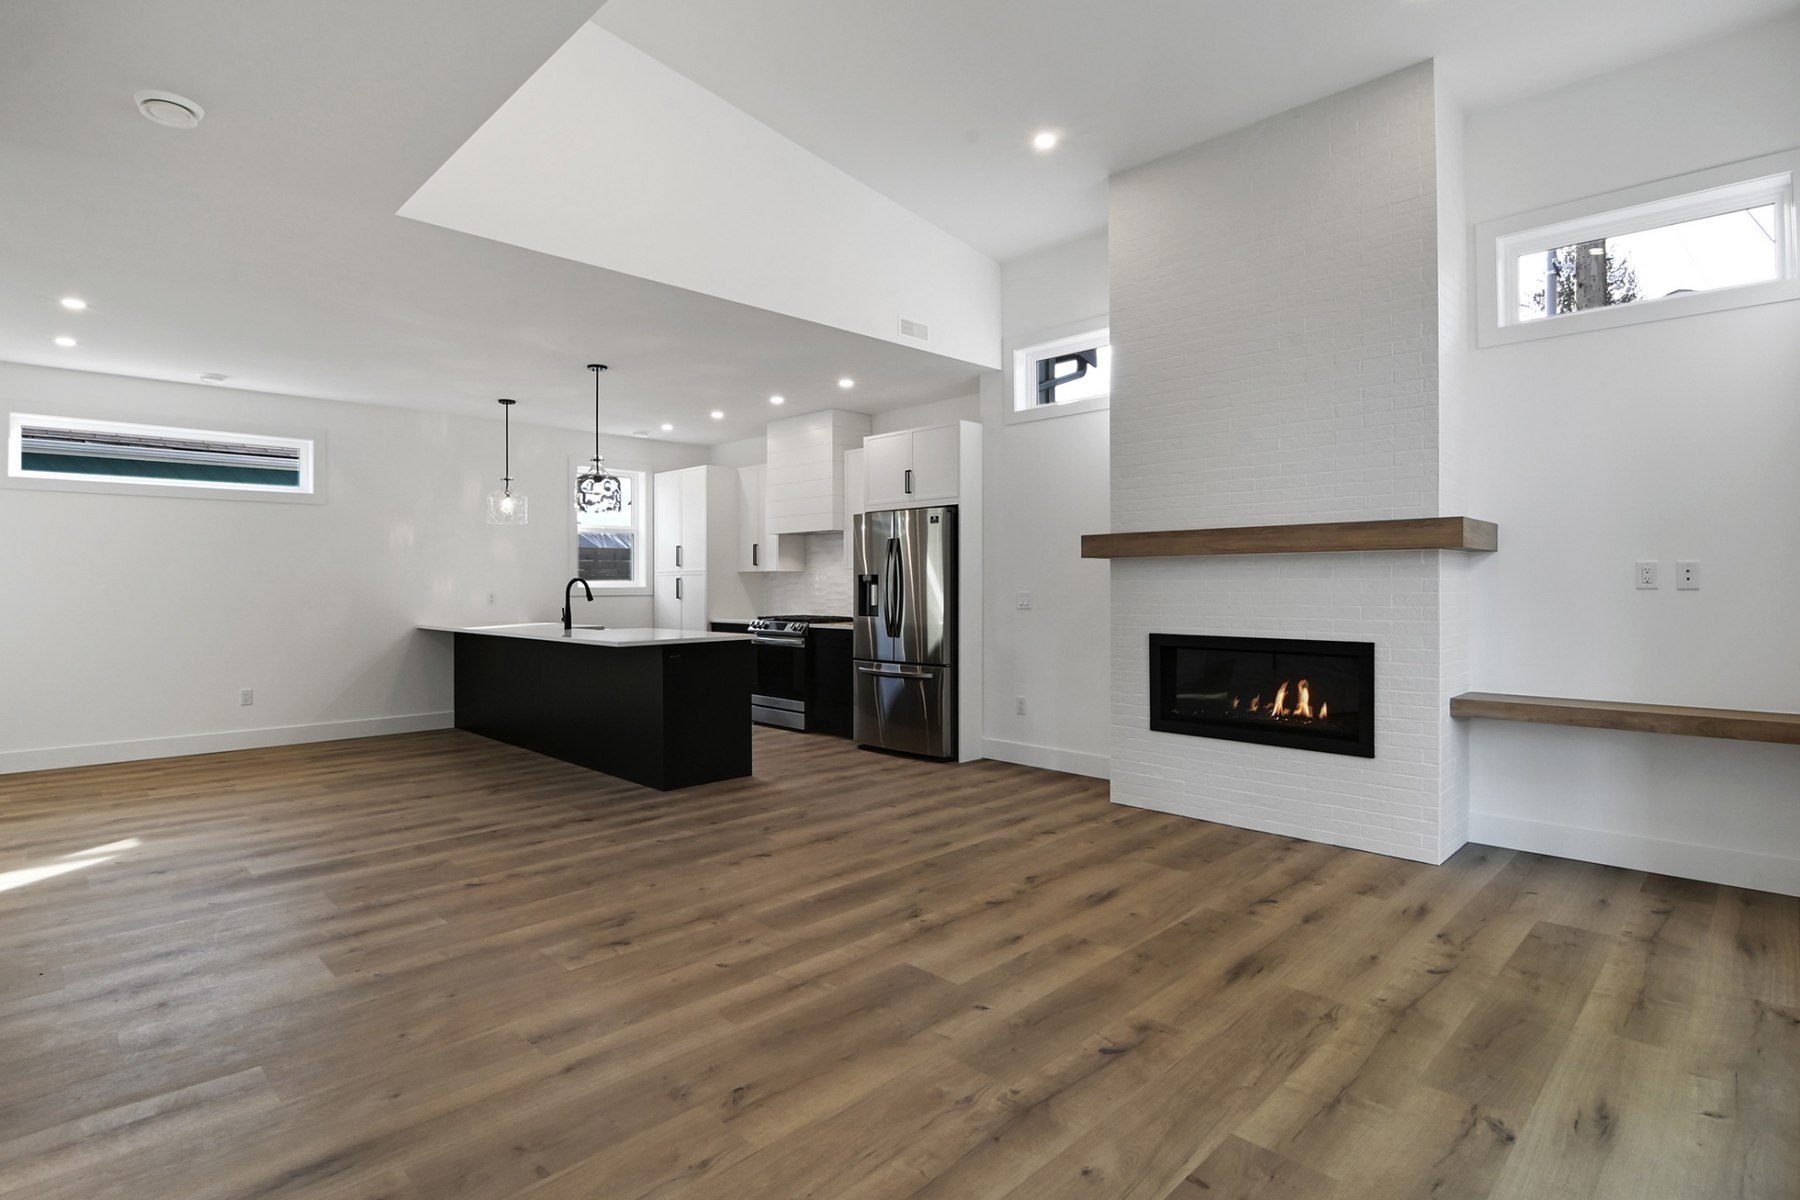 1_harmony_homes_patterson_ave_infill_project_empty_space_kitchen_gallery_image_10